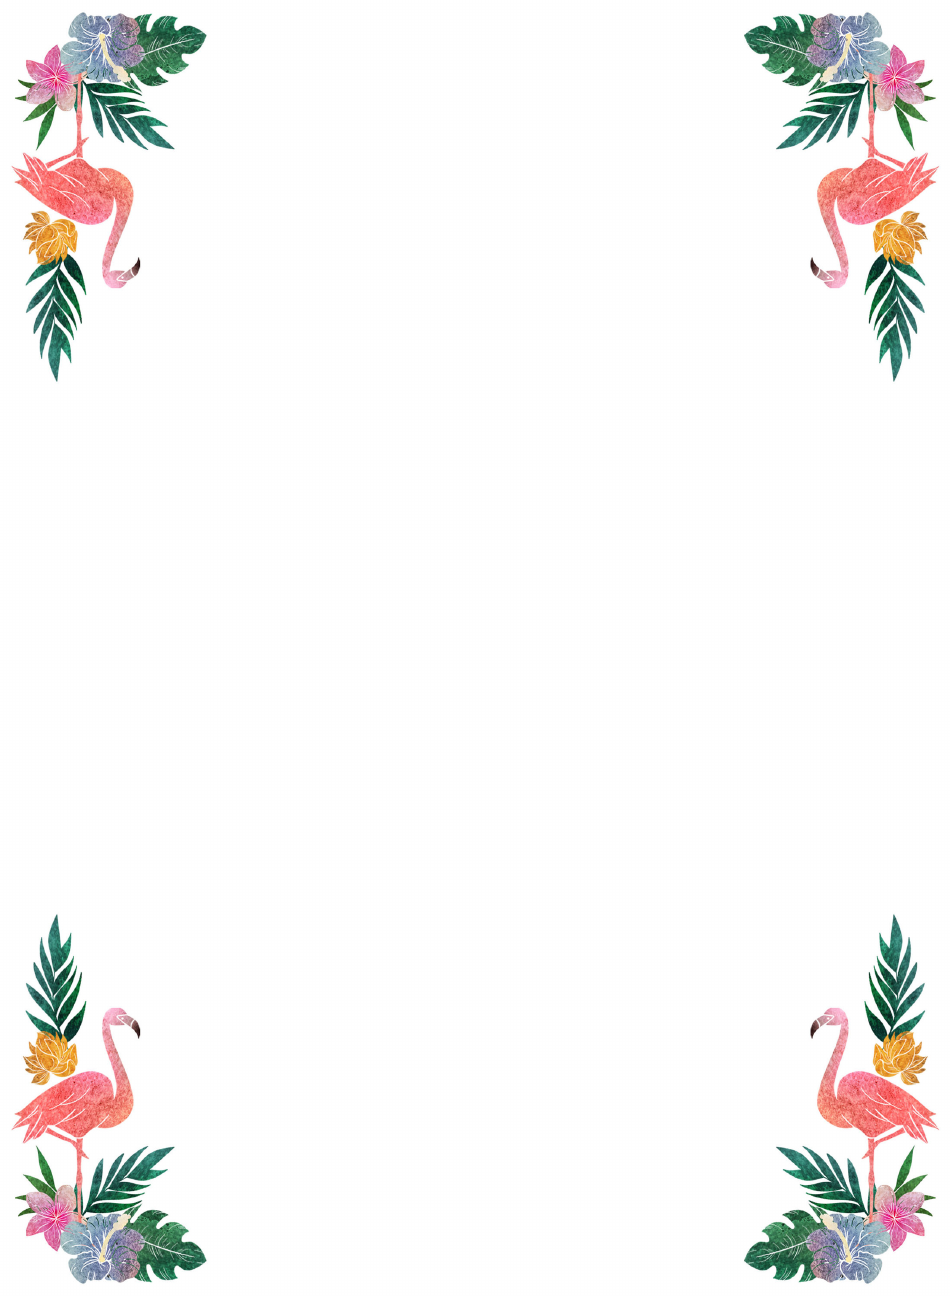 Flamingo Page Border Template Preview - elegantly designed and ready to be downloaded on TemplateRoller.com.